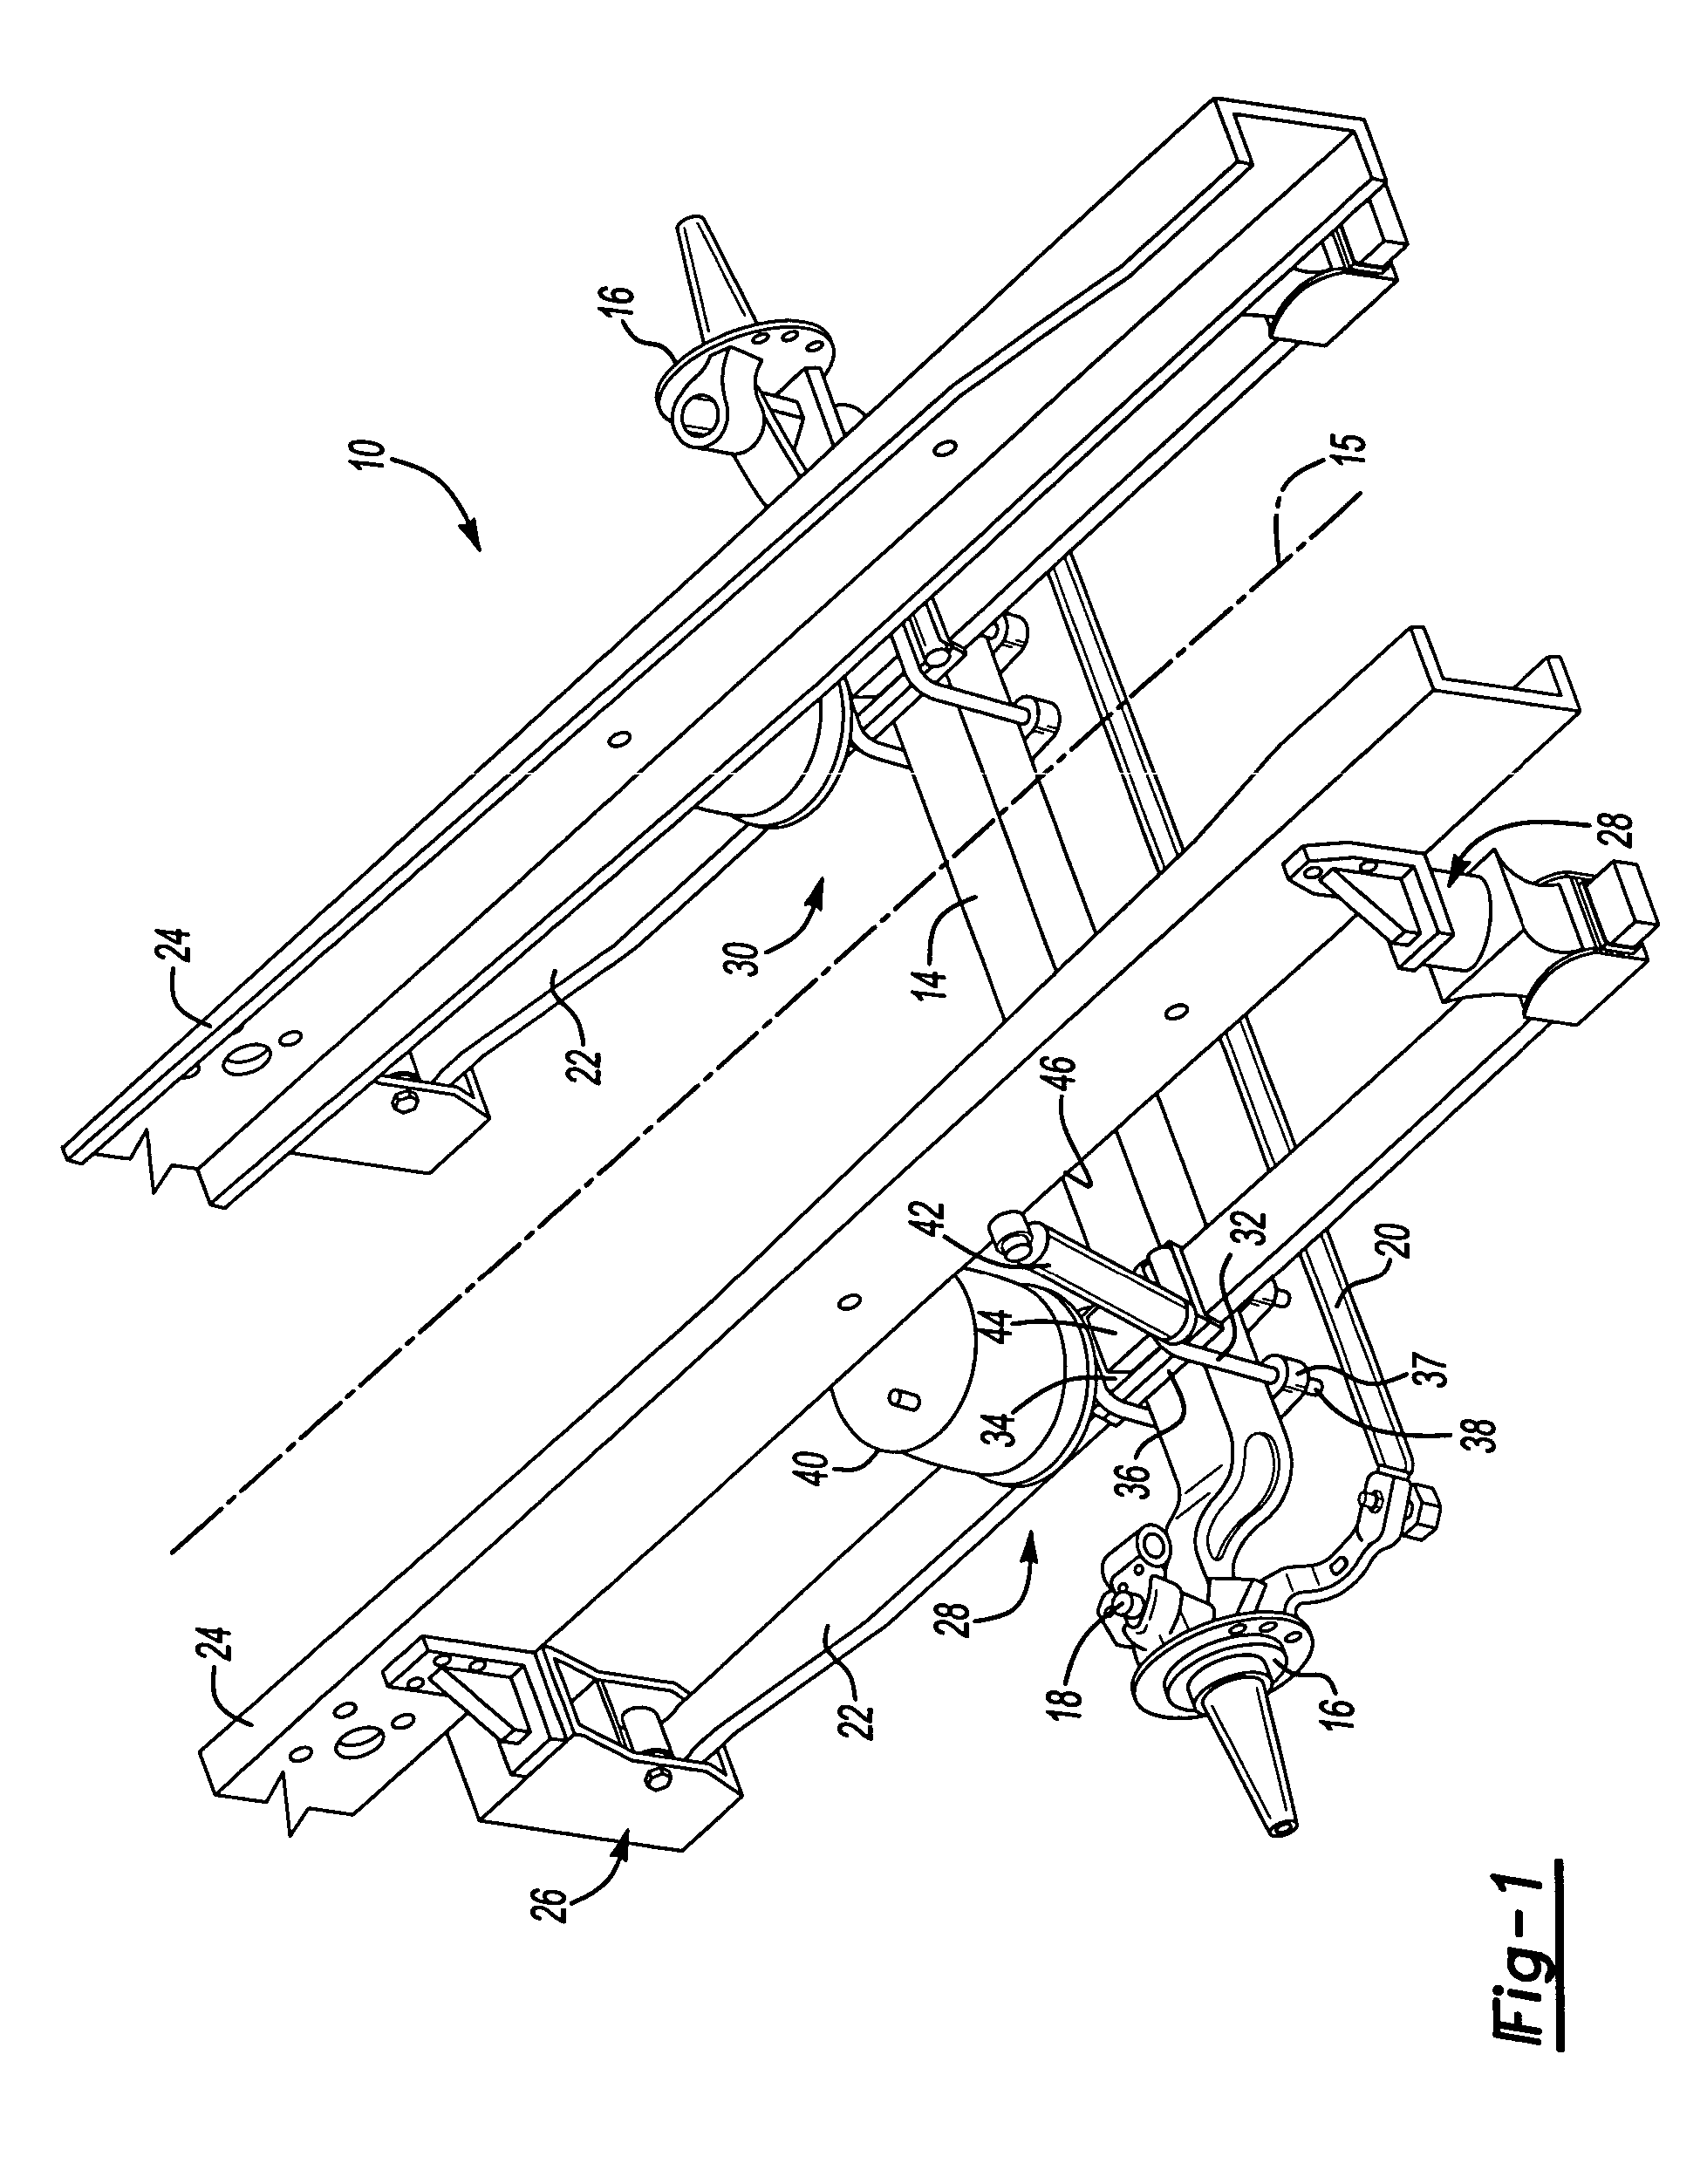 Attachment arrangement for a composite leaf spring which accommodates longitudinal movement through shear displacement